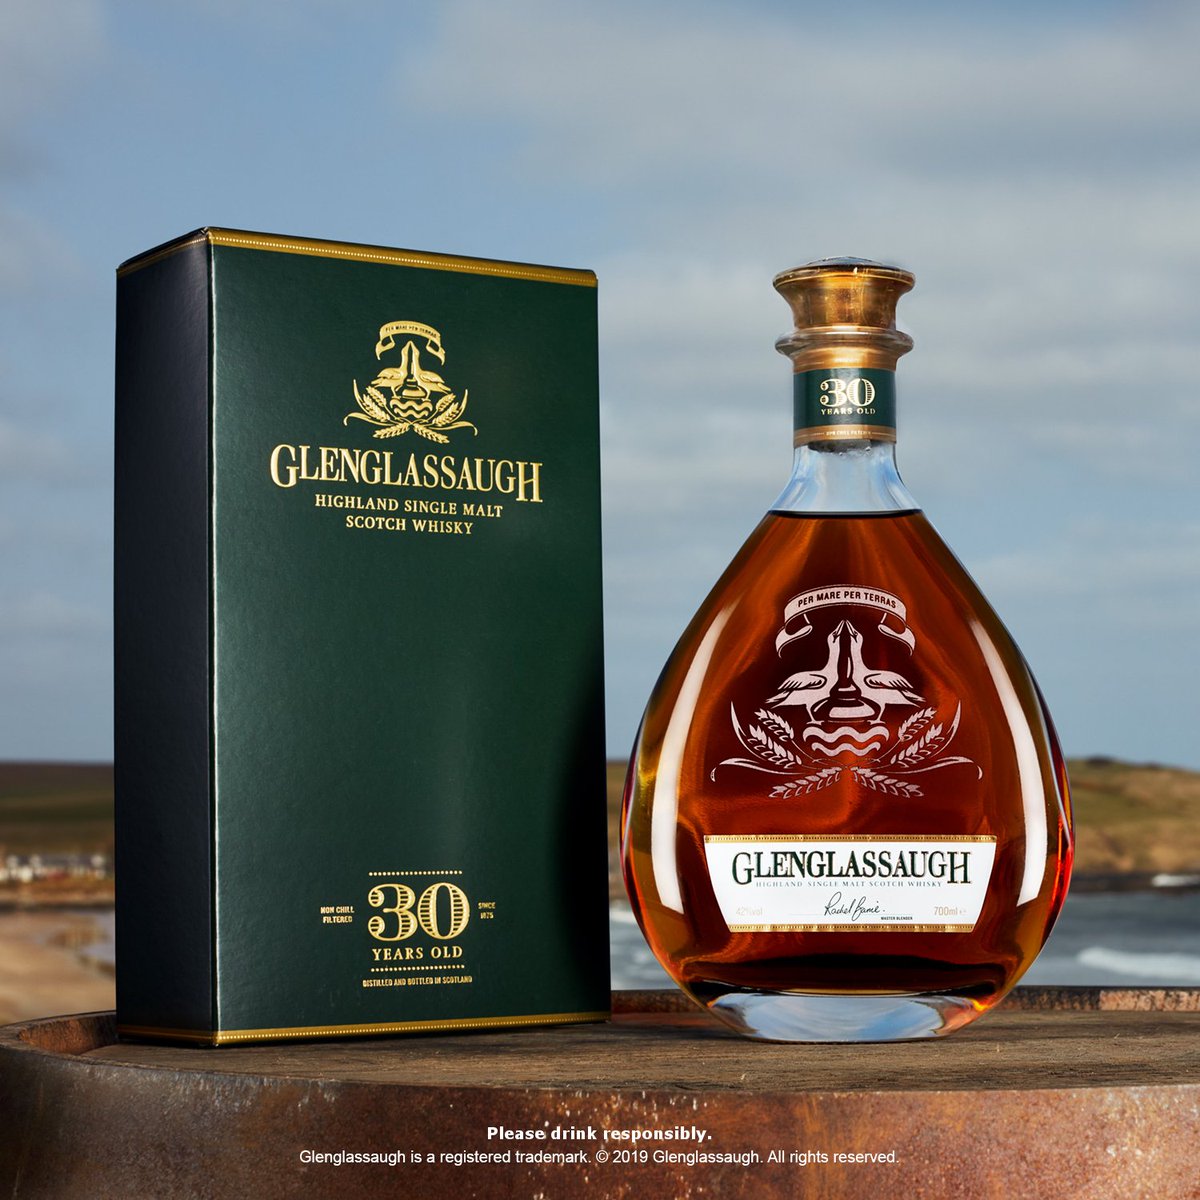 With decades of coastal maturation, Glenglassaugh 30 year old takes on rich notes of tropical fruit, creating a luscious single malt. #Glenglassaugh #SingleMalt #Whisky